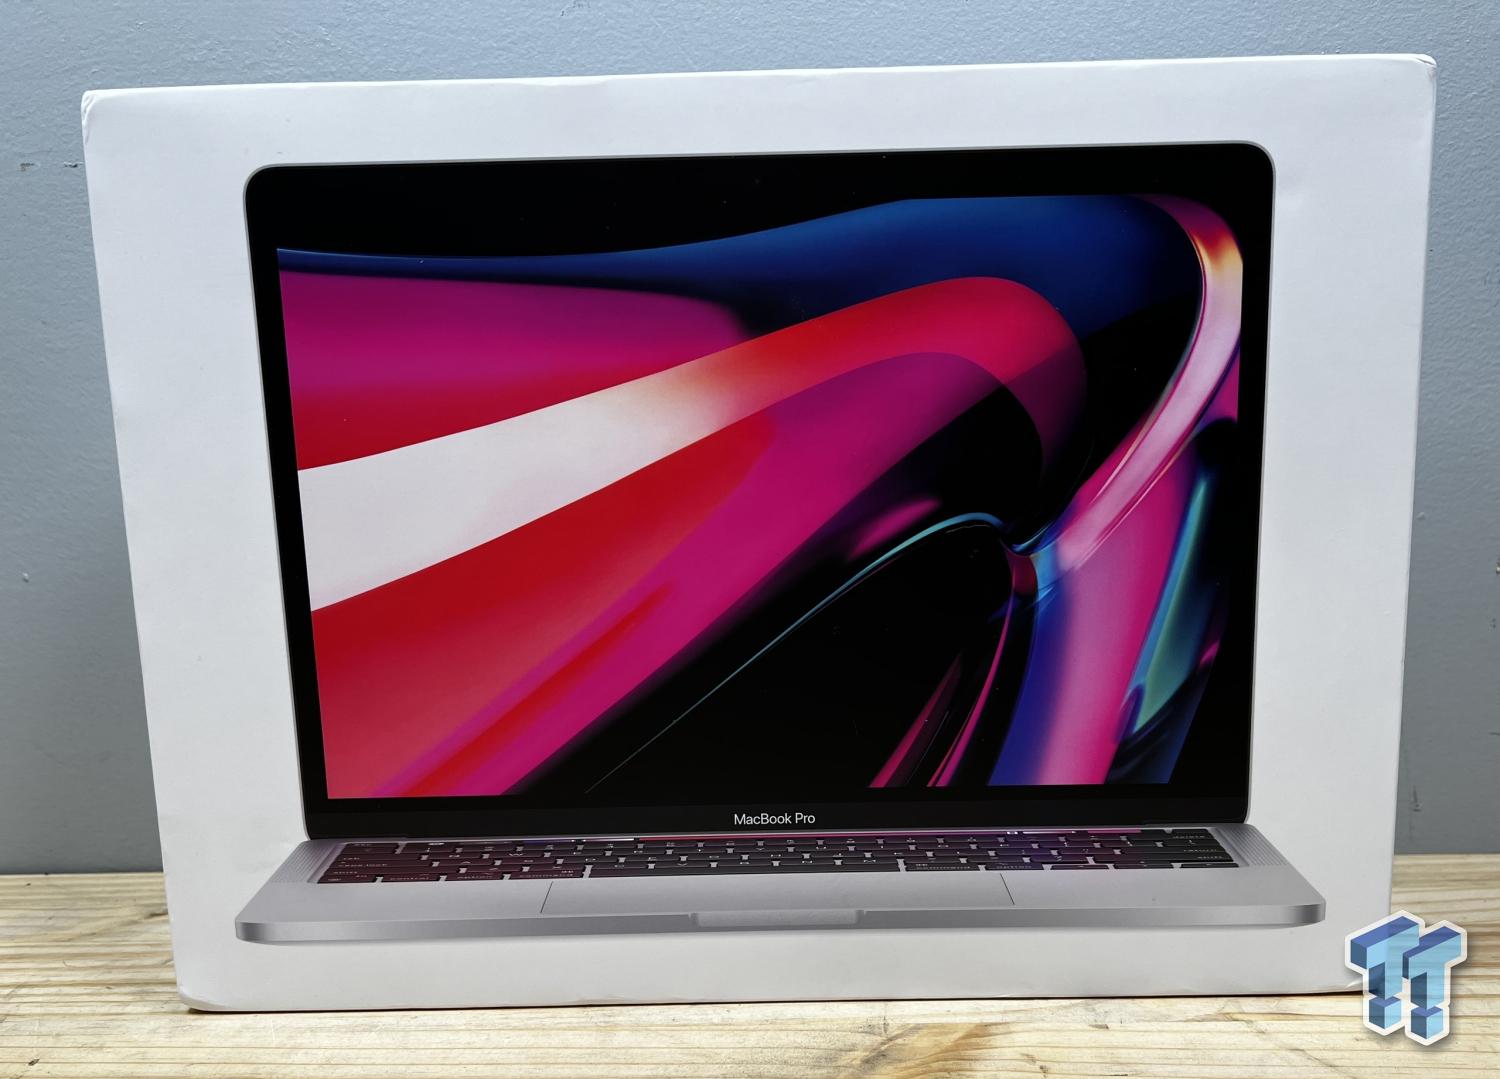 M2 MacBook Pro 13-inch review: Pro in name only 